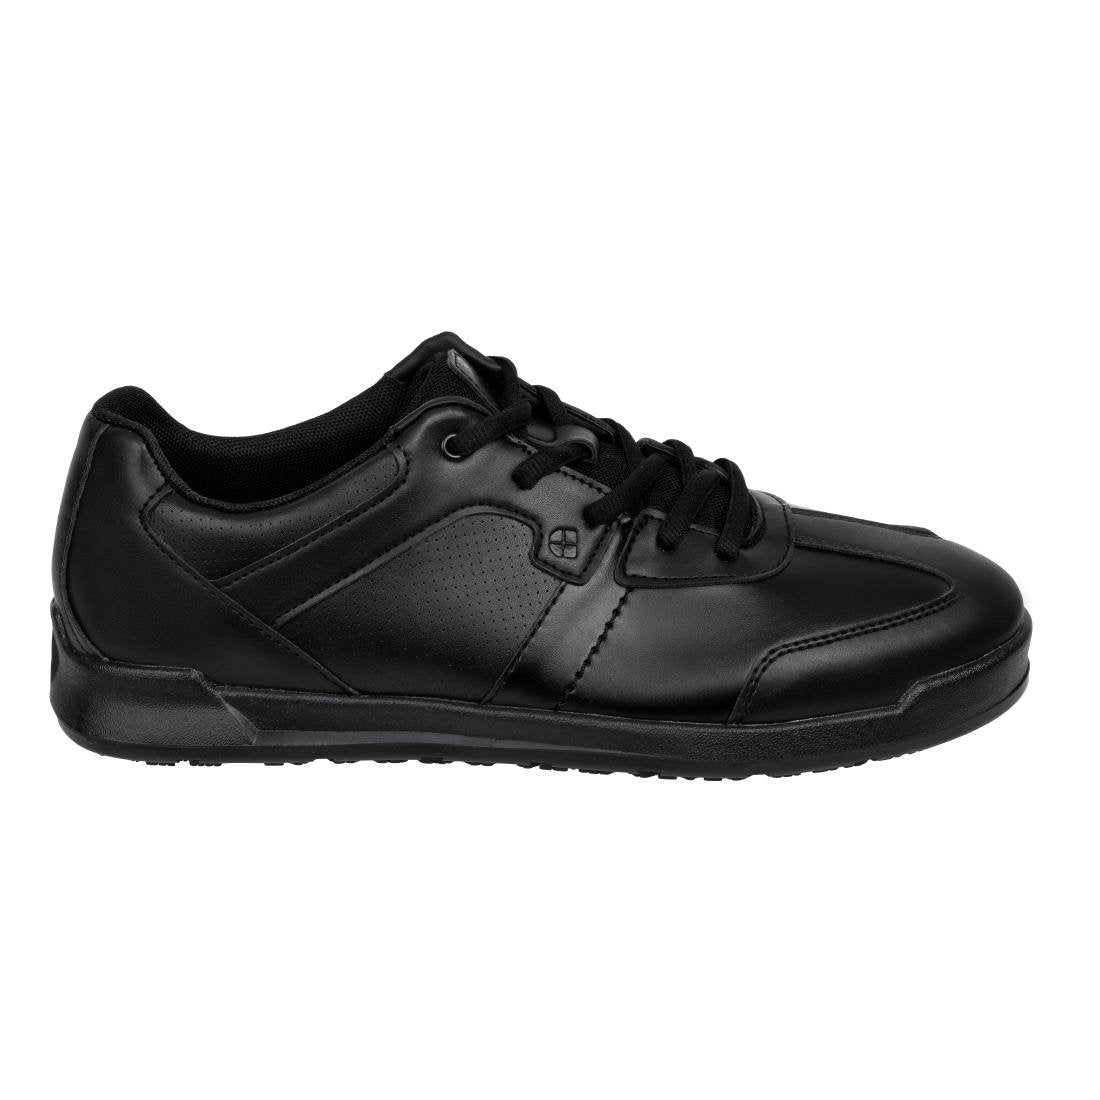 BB585-46 Shoes for Crews Freestyle Trainers Black Size 46